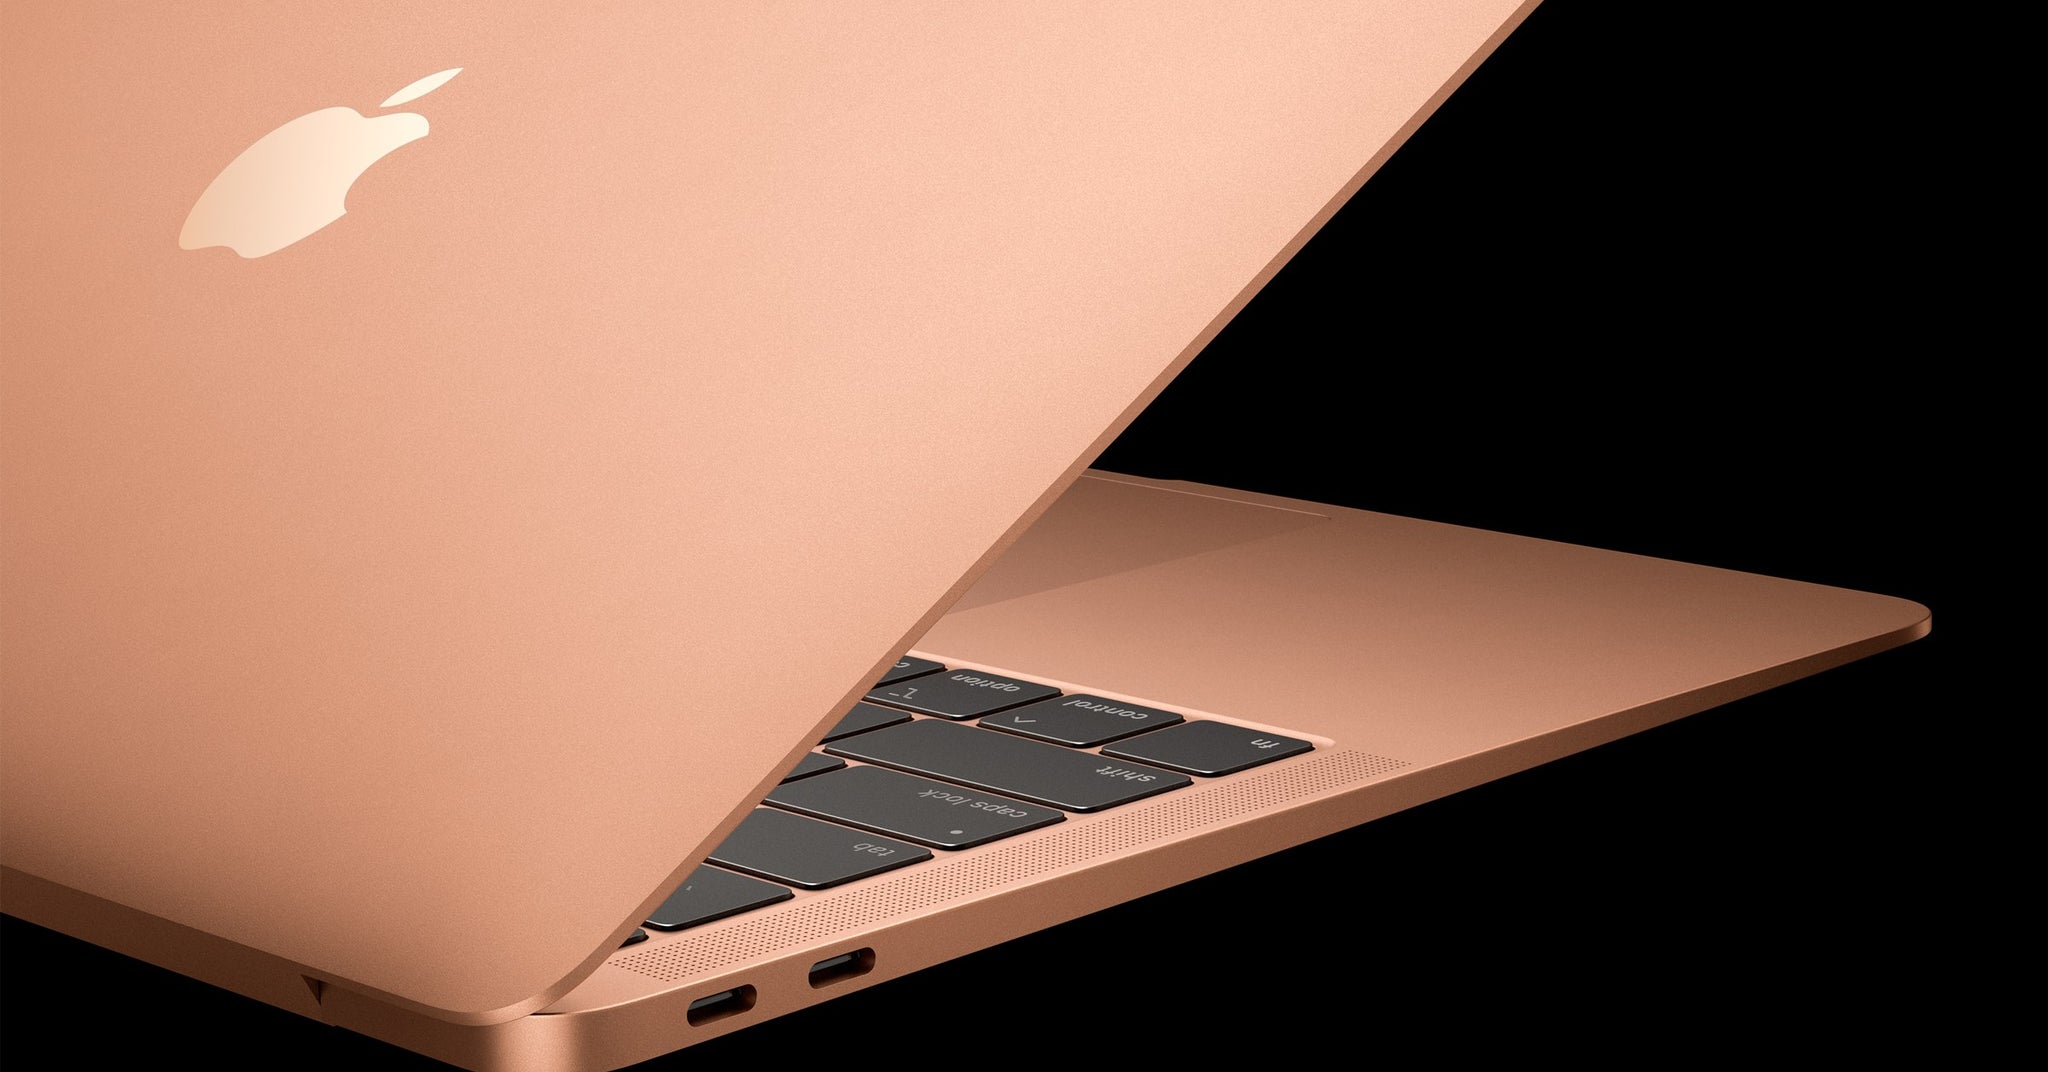 What Accessories Do You Need with a MacBook Air?